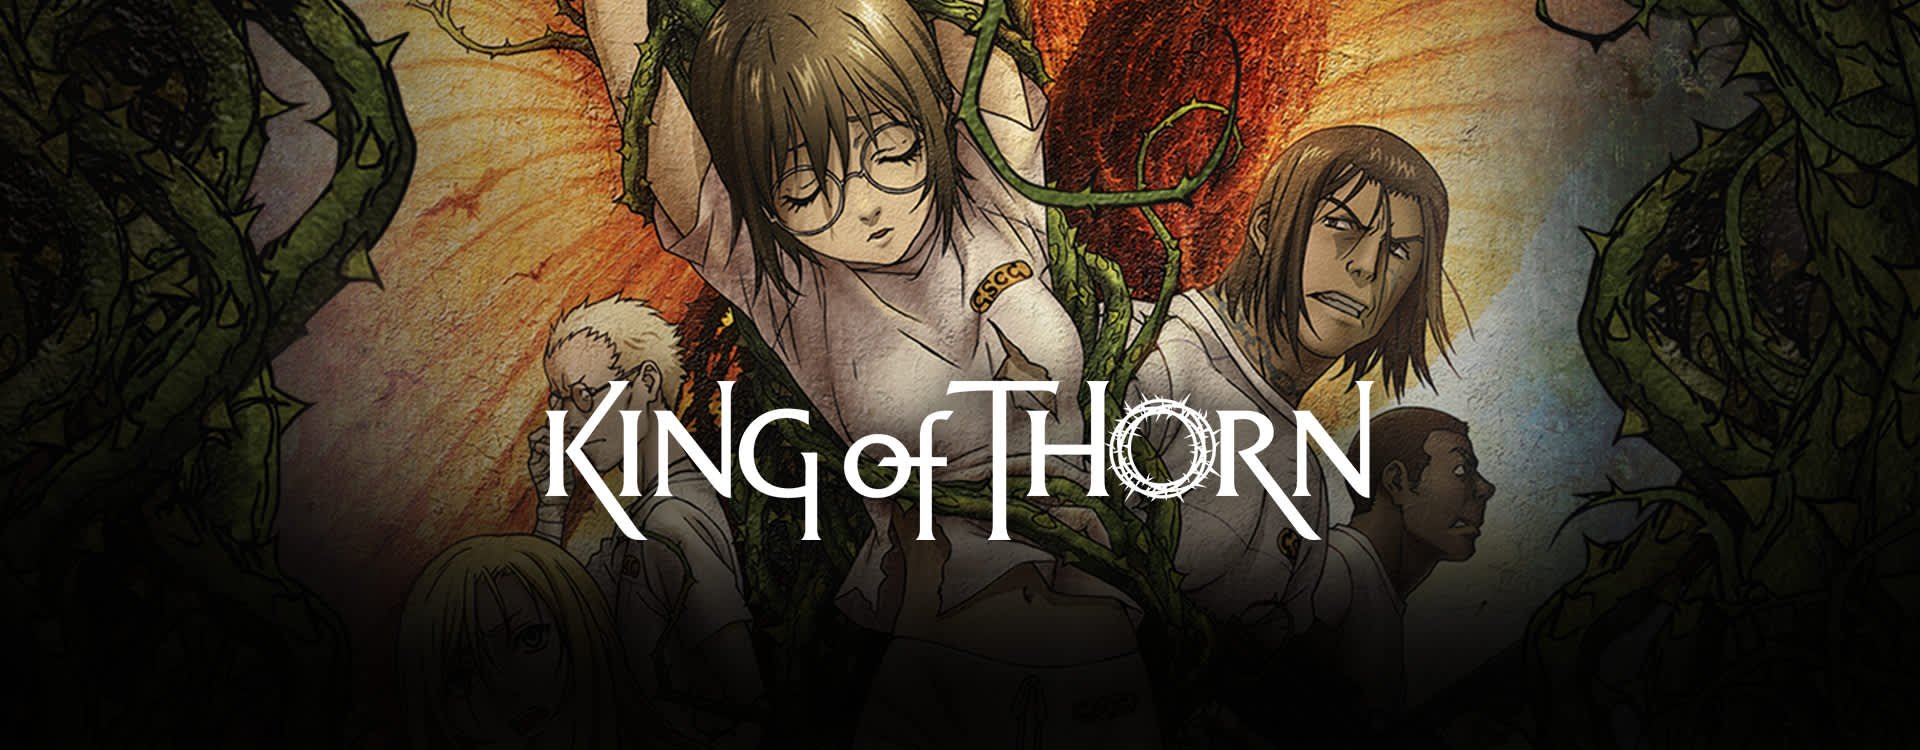 King of thorn 1080P, 2K, 4K, 5K HD wallpapers free download | Wallpaper  Flare